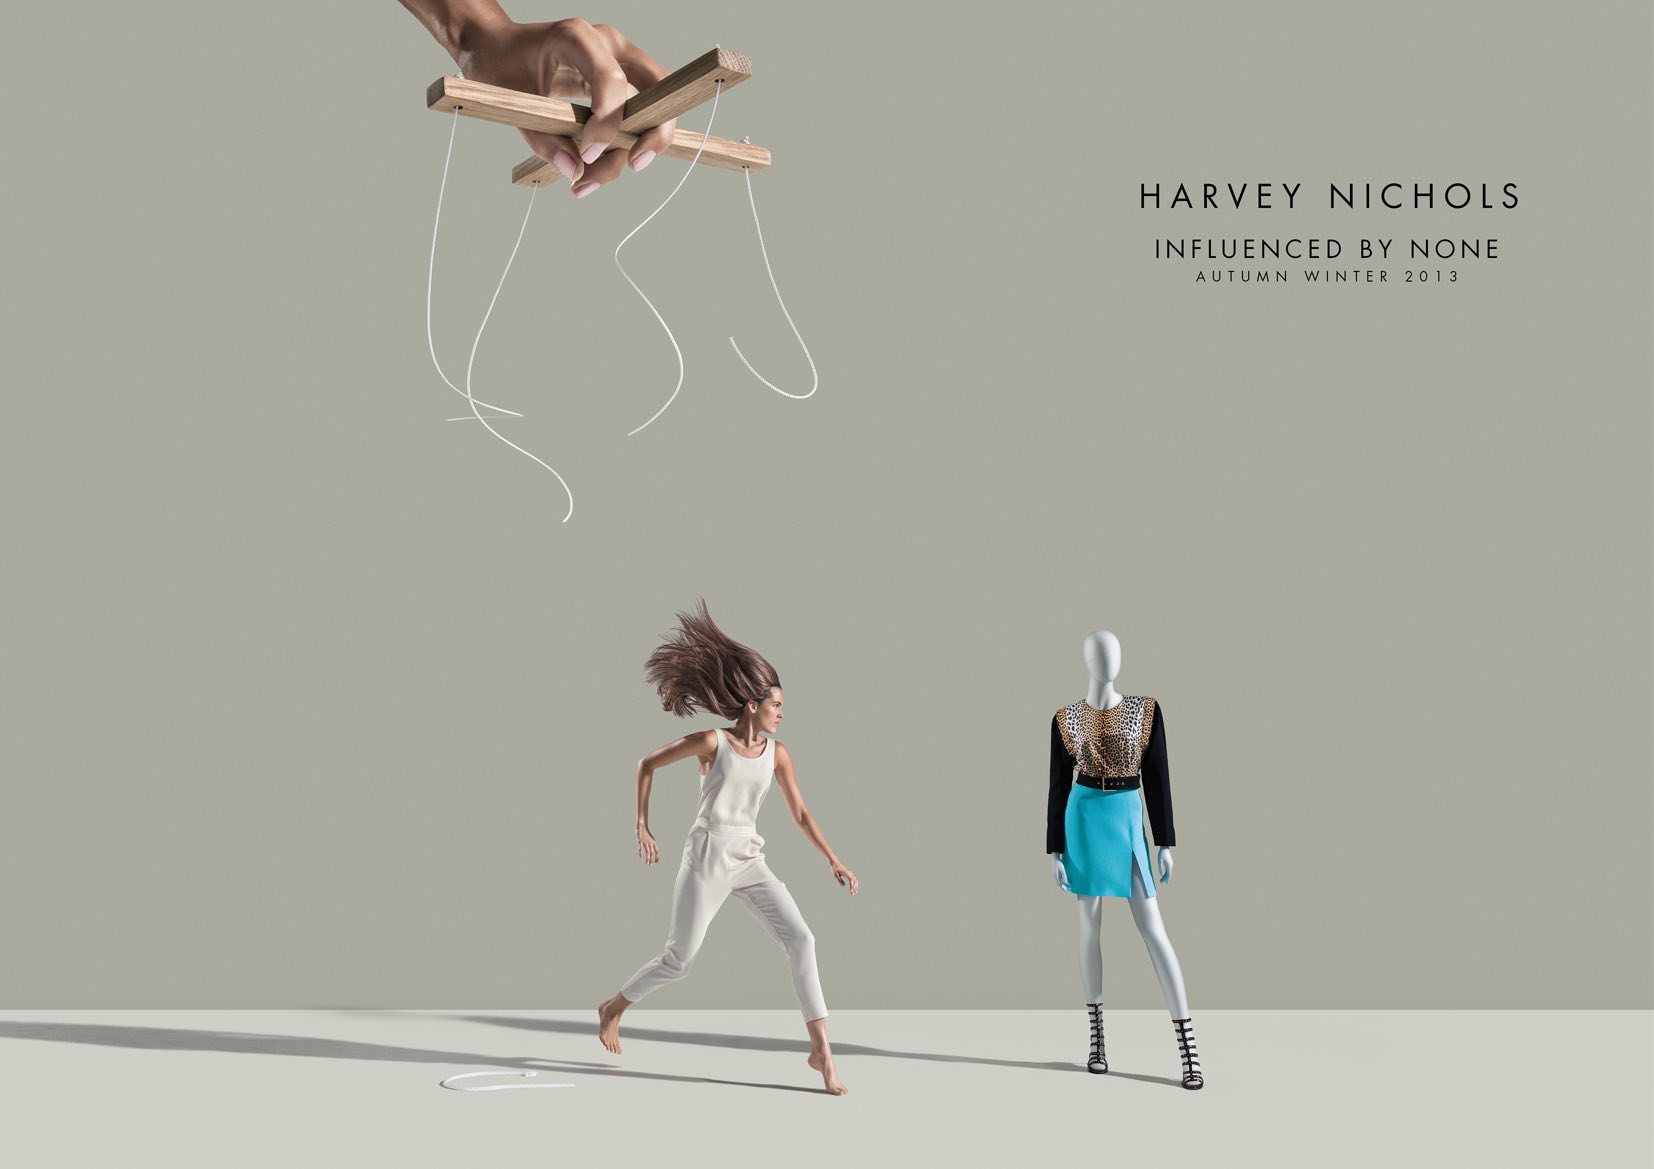 Harvey_Nichols_Influenced_by_None_ad _campaign_1_cotw